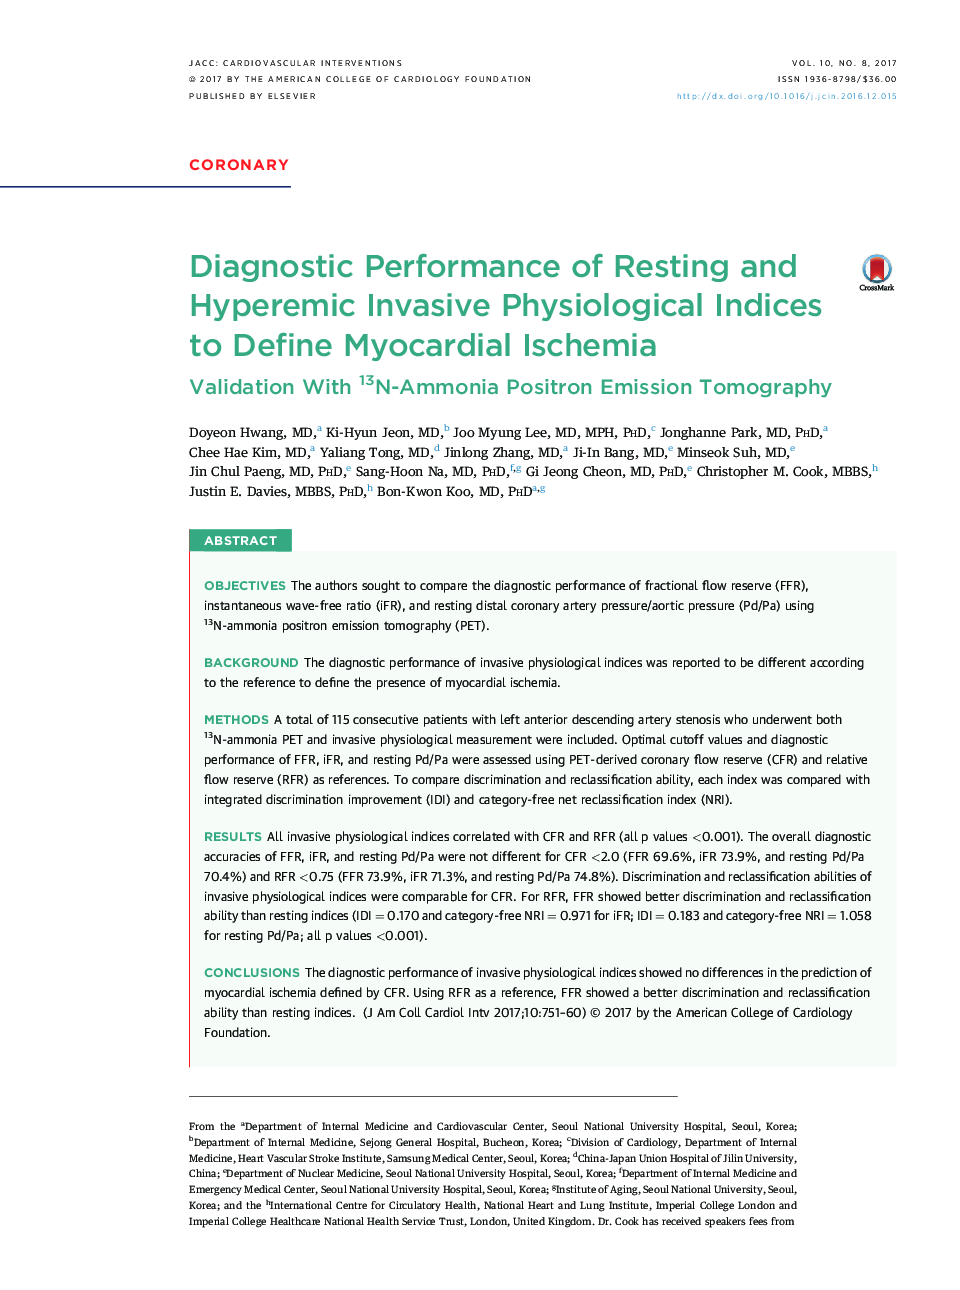 CoronaryDiagnostic Performance of Resting and Hyperemic Invasive Physiological Indices to Define Myocardial Ischemia: Validation With 13N-Ammonia Positron Emission Tomography